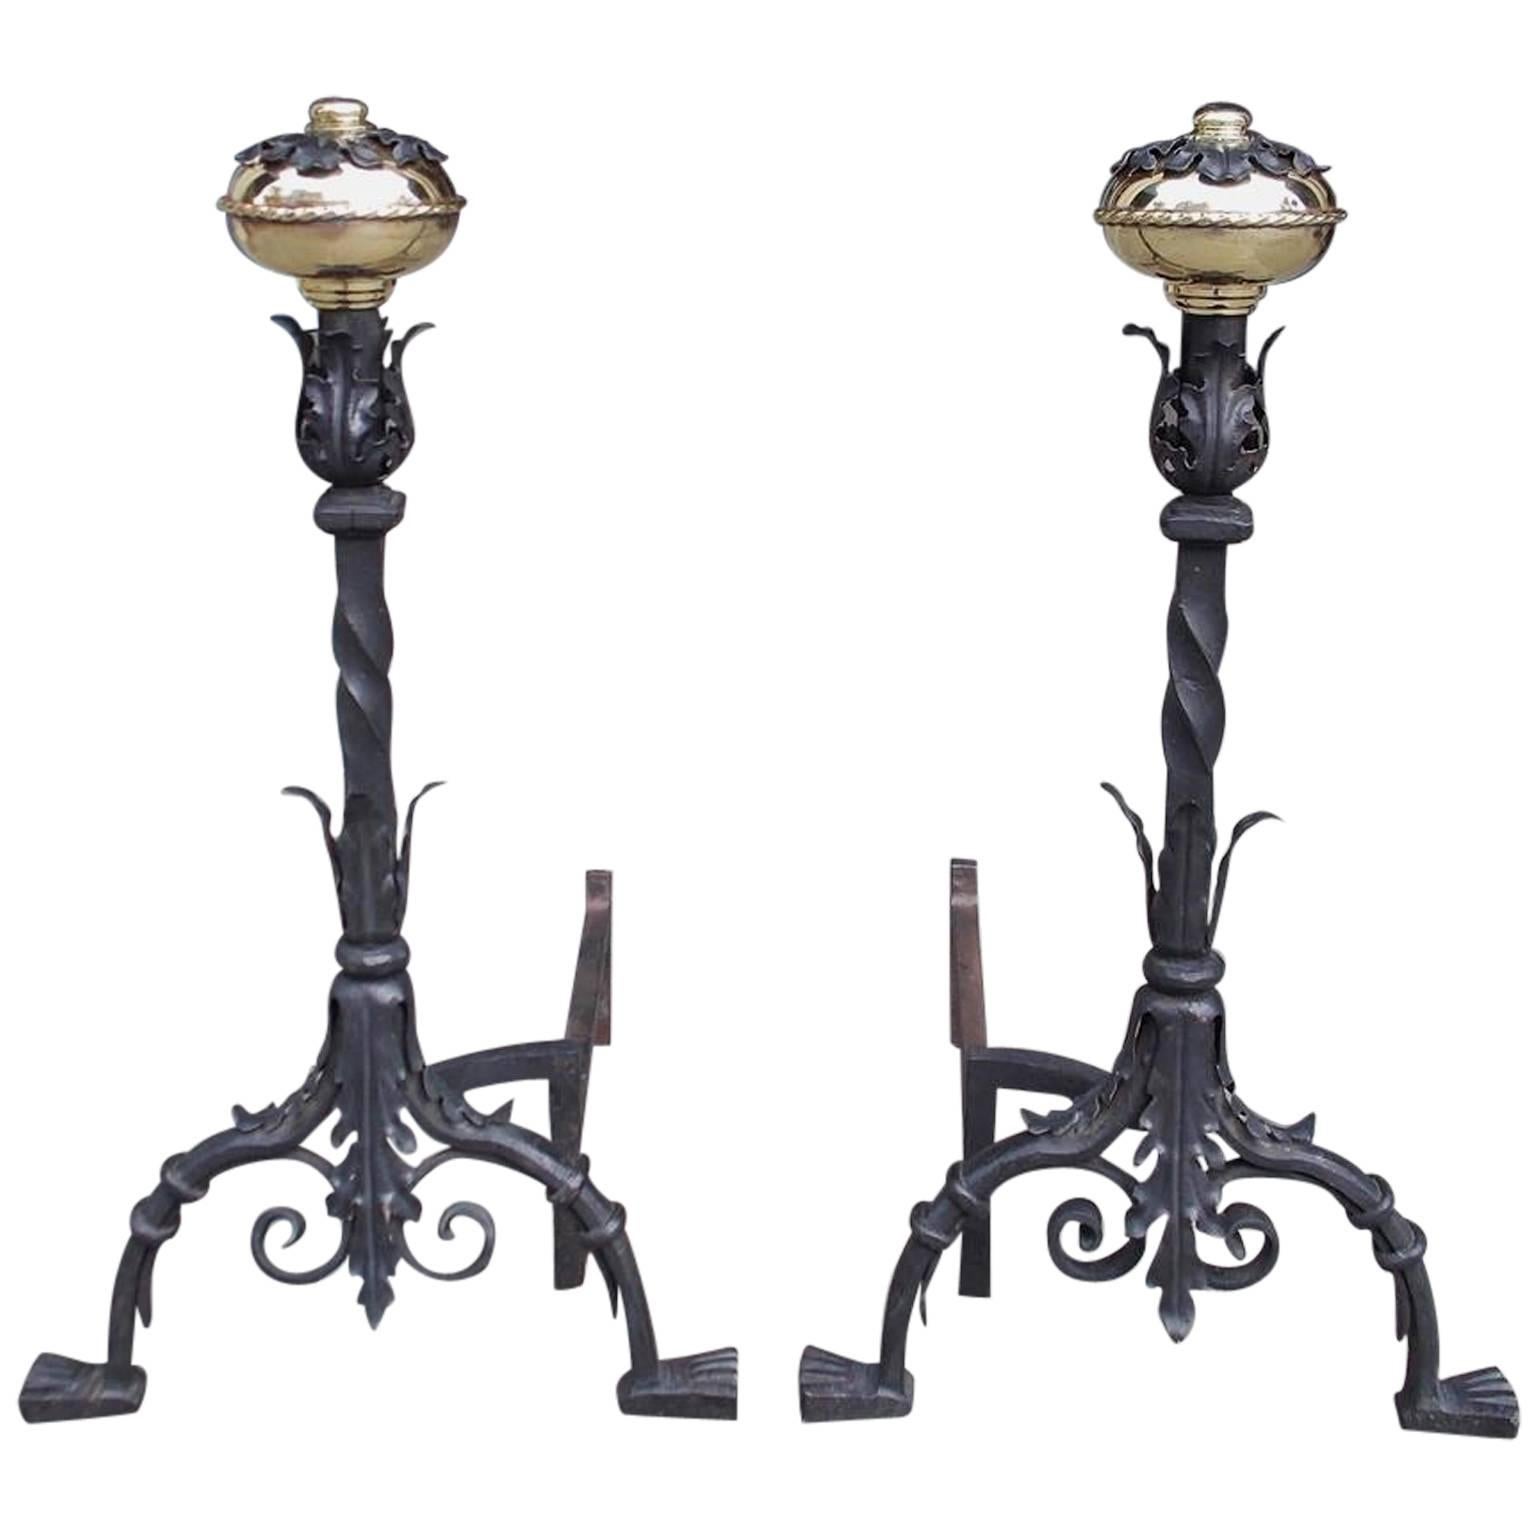 Pair of Italian Brass and Wrought Iron Floral Andirions, Circa 1810 For Sale